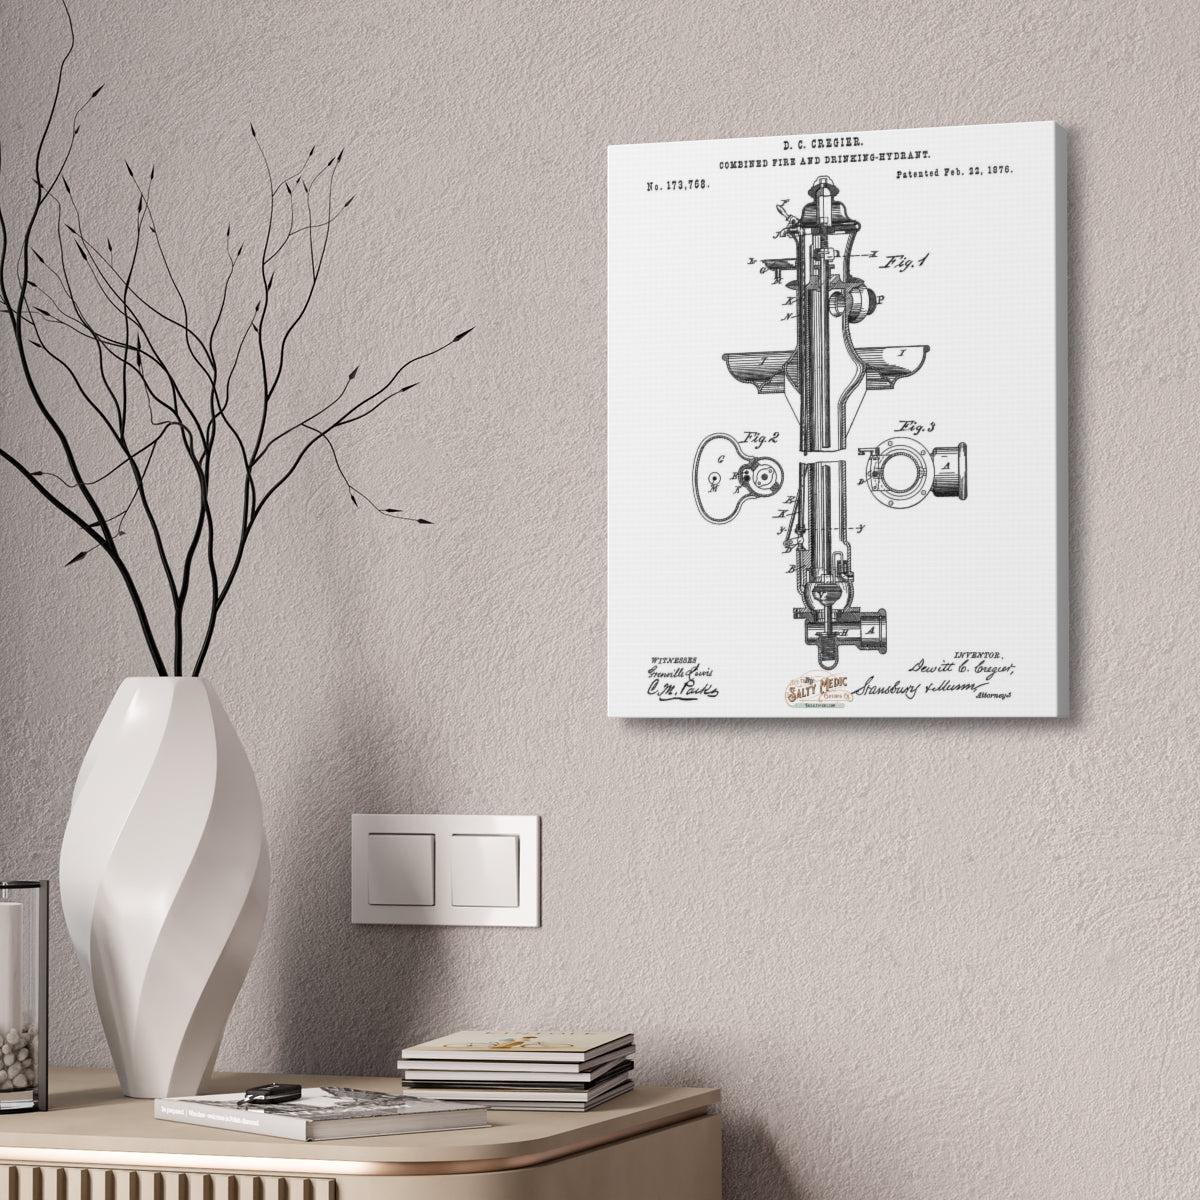 1876 Fire & Drinking Hydrant Patent Wall Art Stretched Canvas, 1.5'' - Salty Medic Clothing Co.